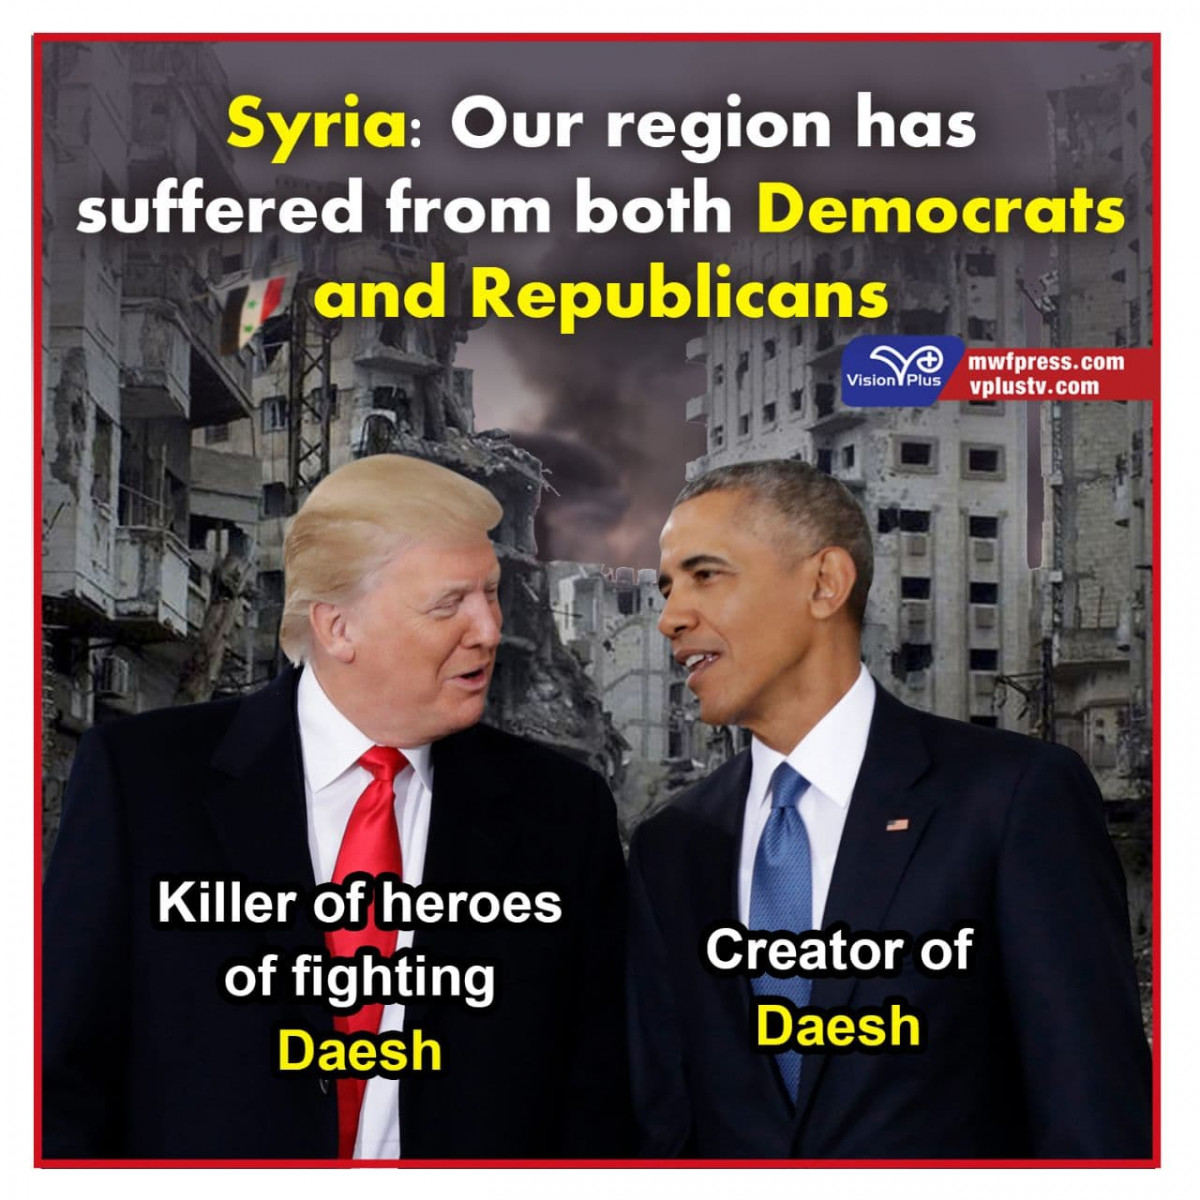 Syria: Our region has suffered from both Democrats and Republicans